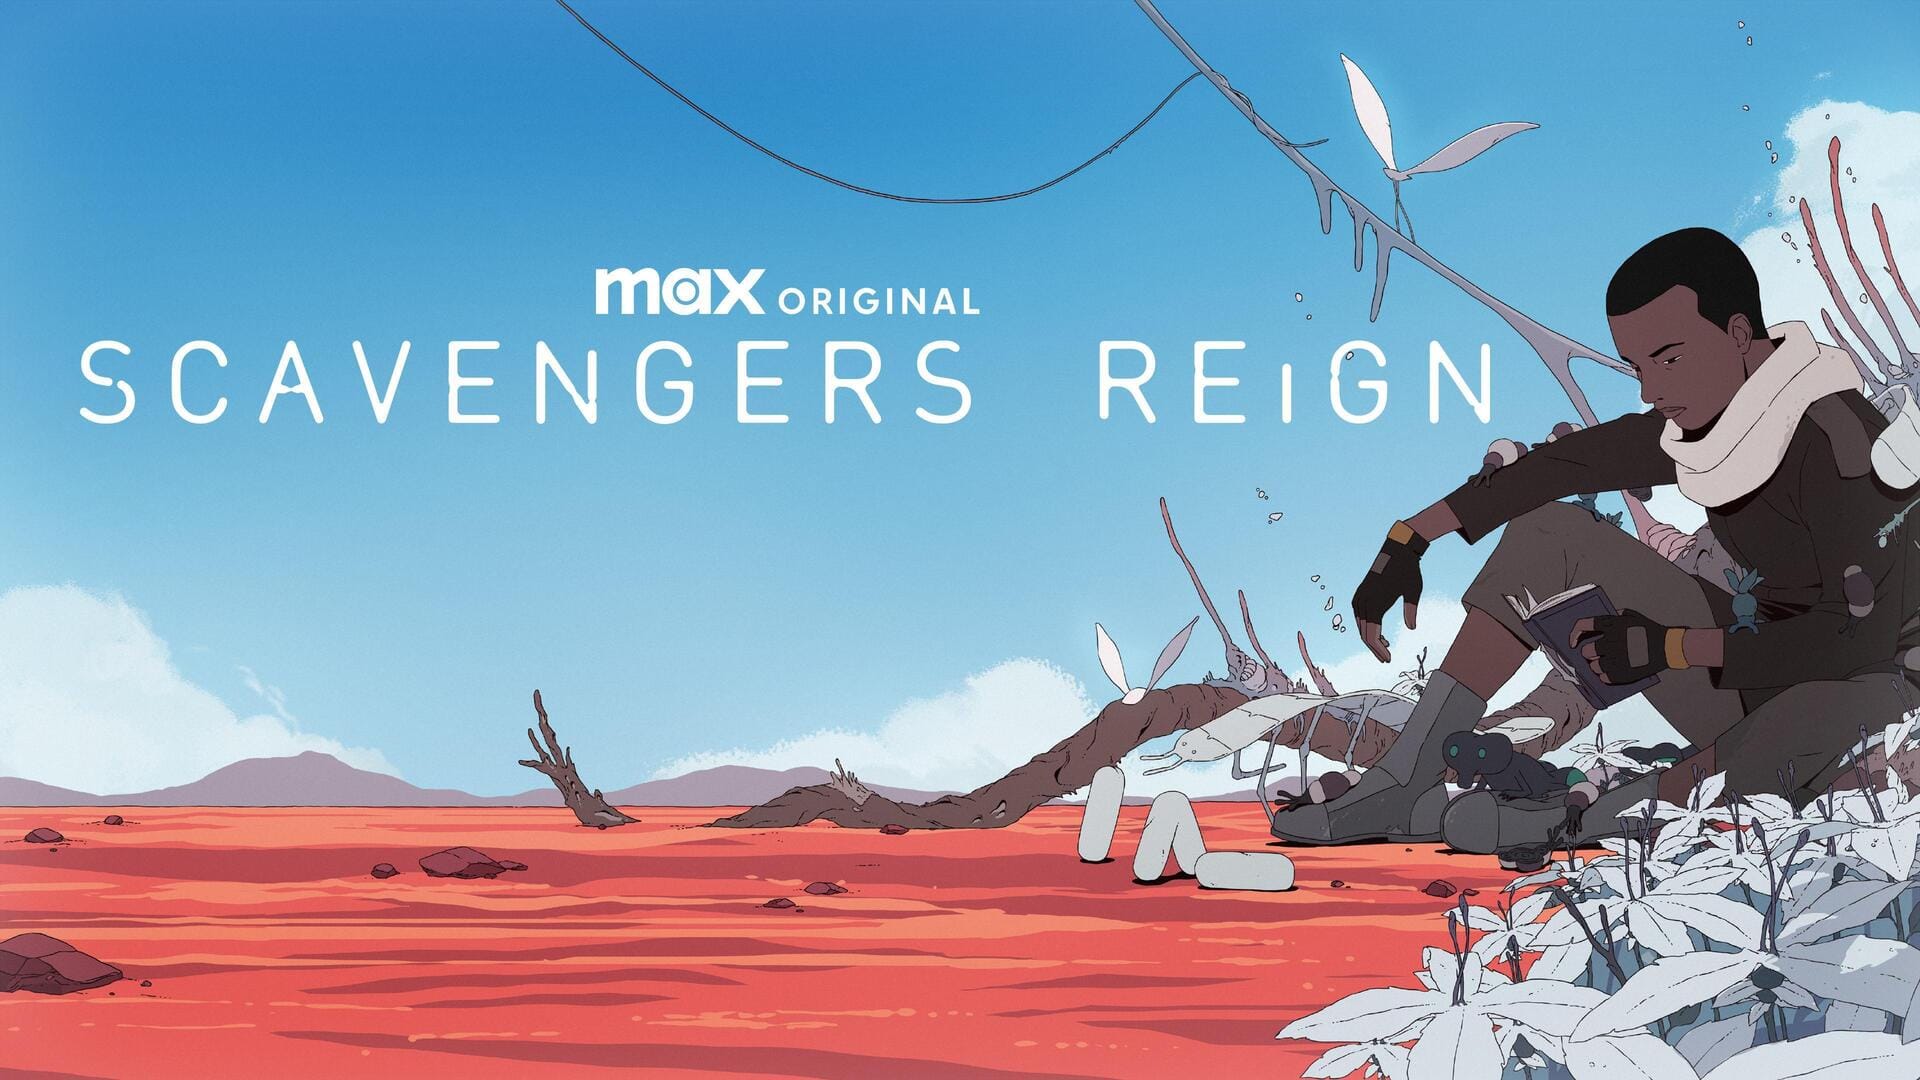 'Scavengers Reign' finds new home on Netflix after Max cancelation